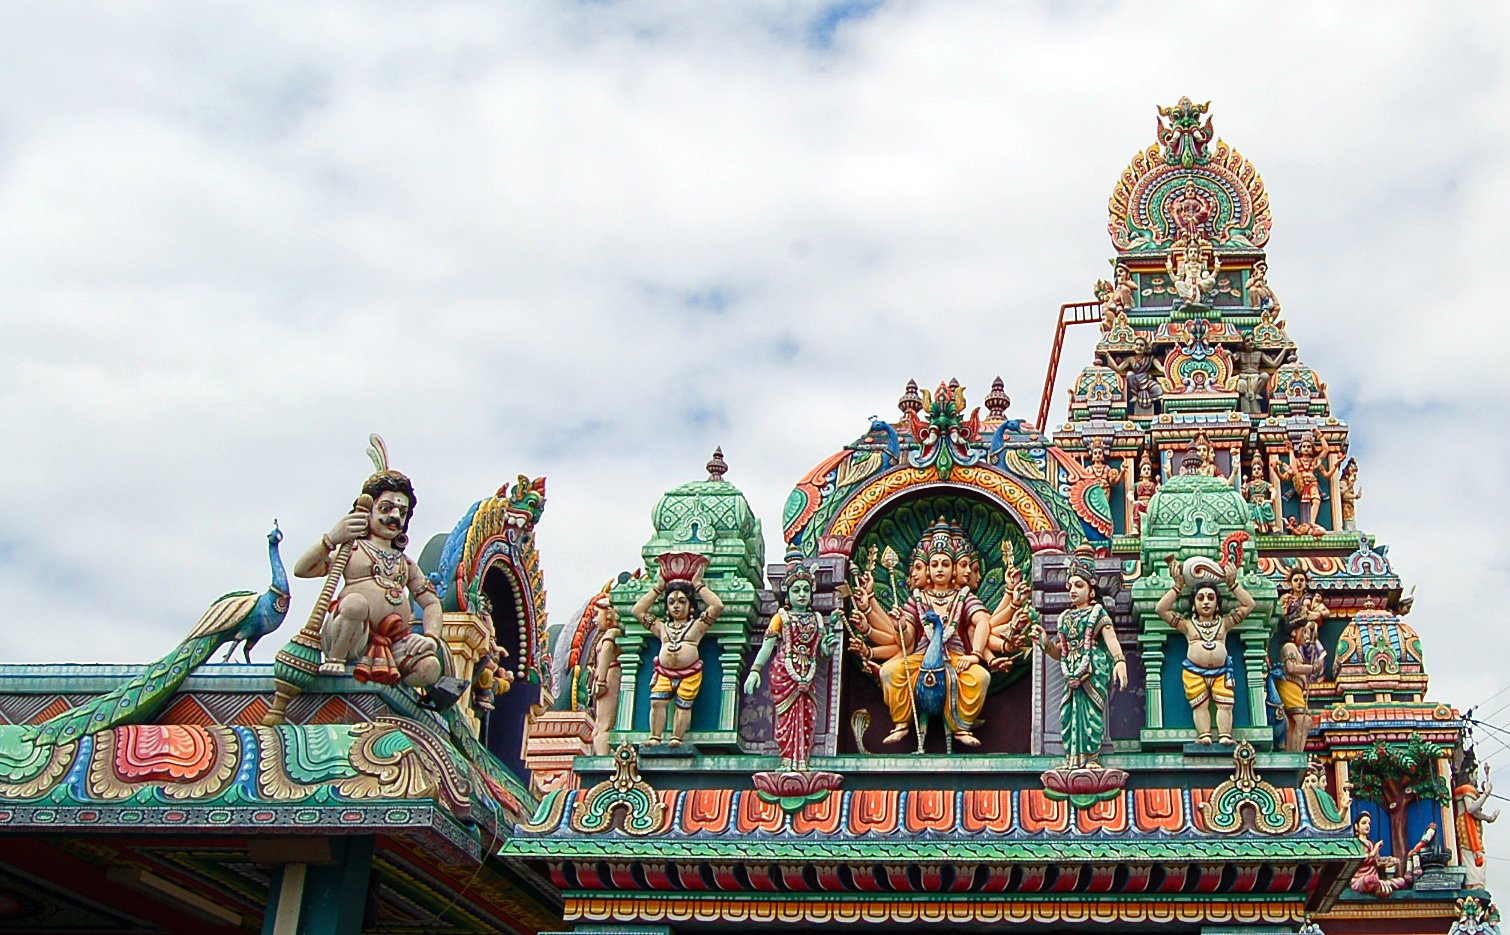 statue displayed on top of an ornate temple